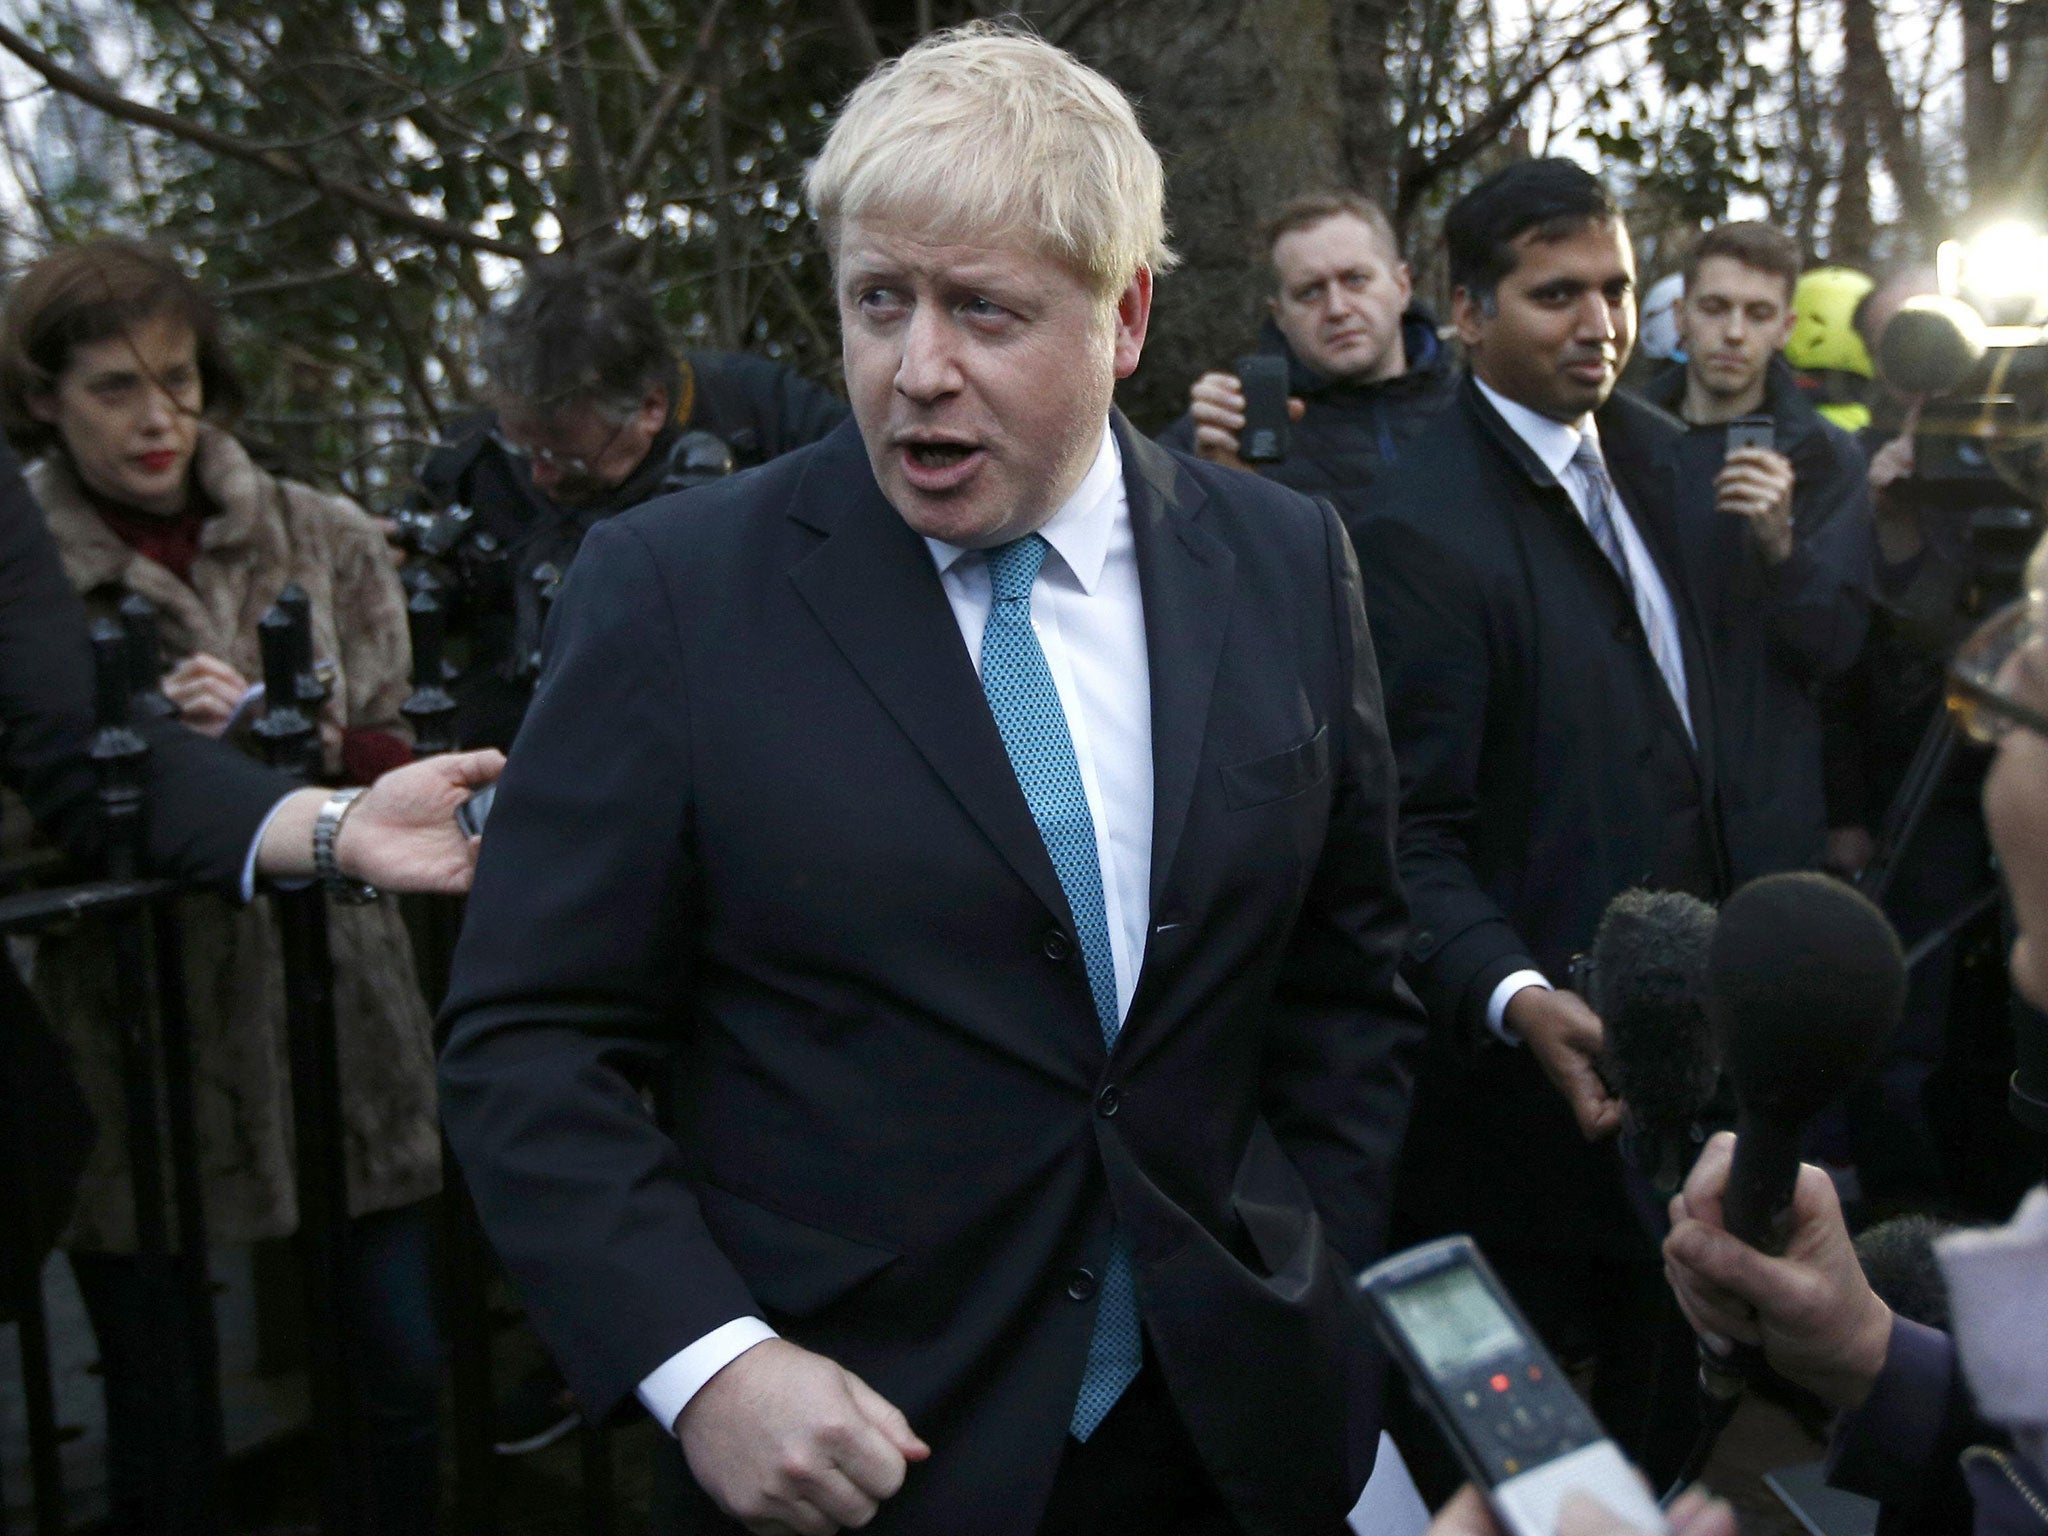 London Mayor Boris Johnson speaks to the media in front of his home in London, Britain February 21, 2016